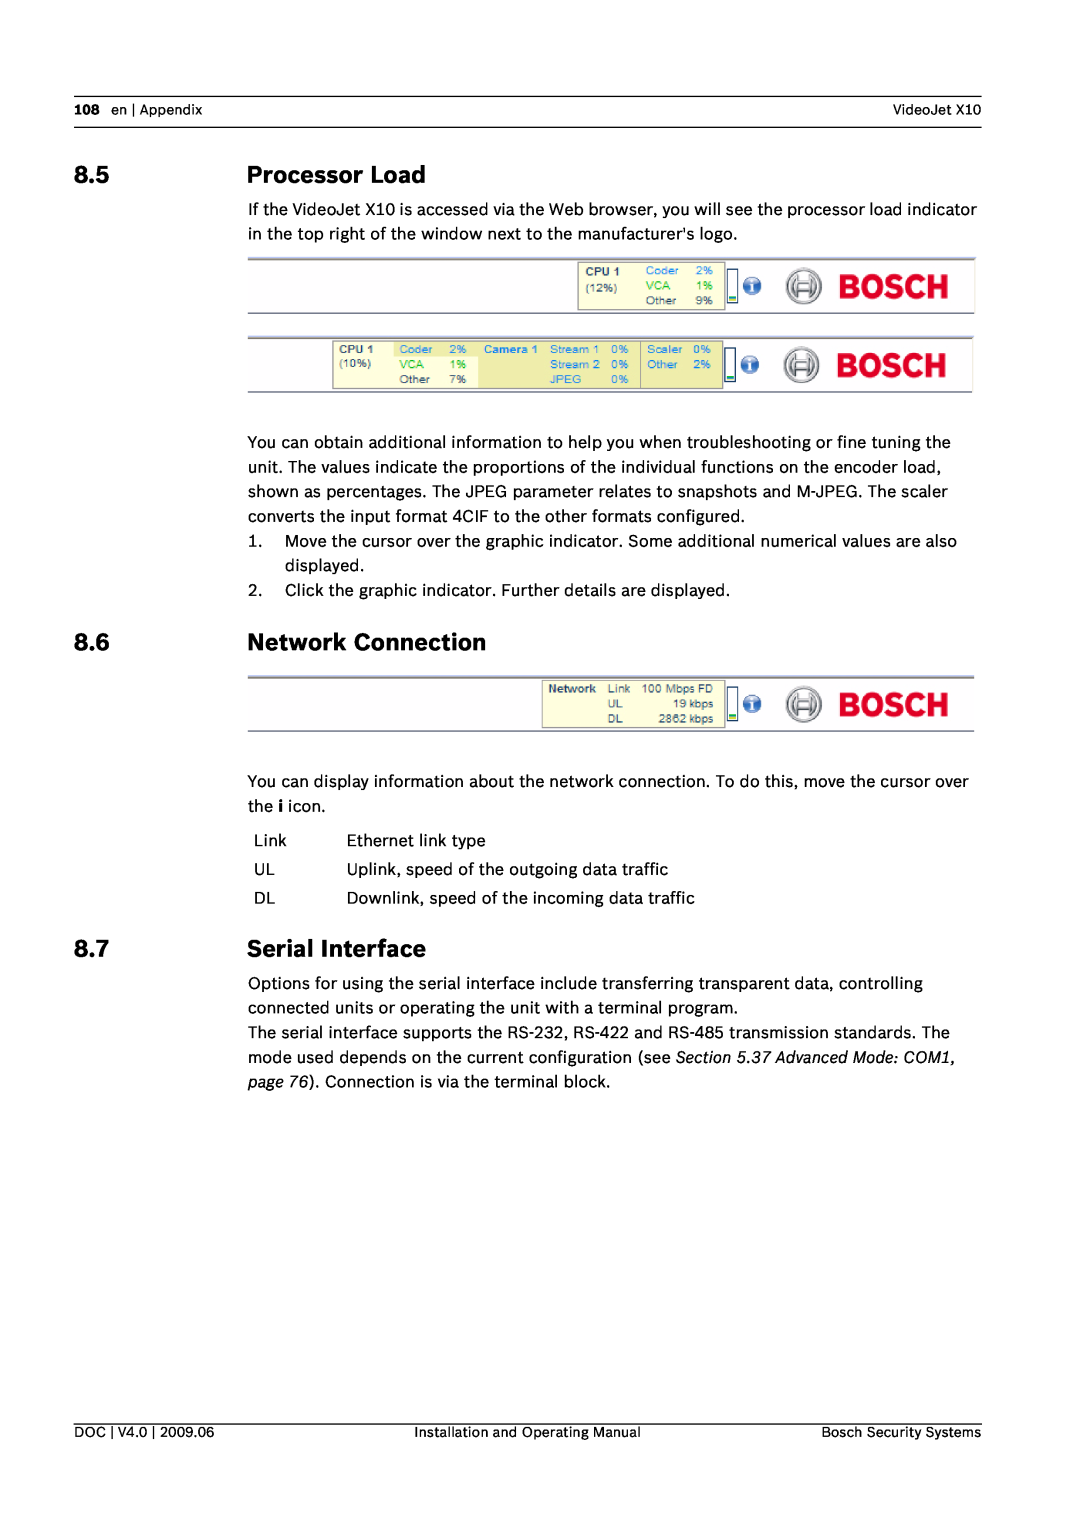 Bosch Appliances X10 manual 8.5Processor Load, Network Connection, 8.7Serial Interface 